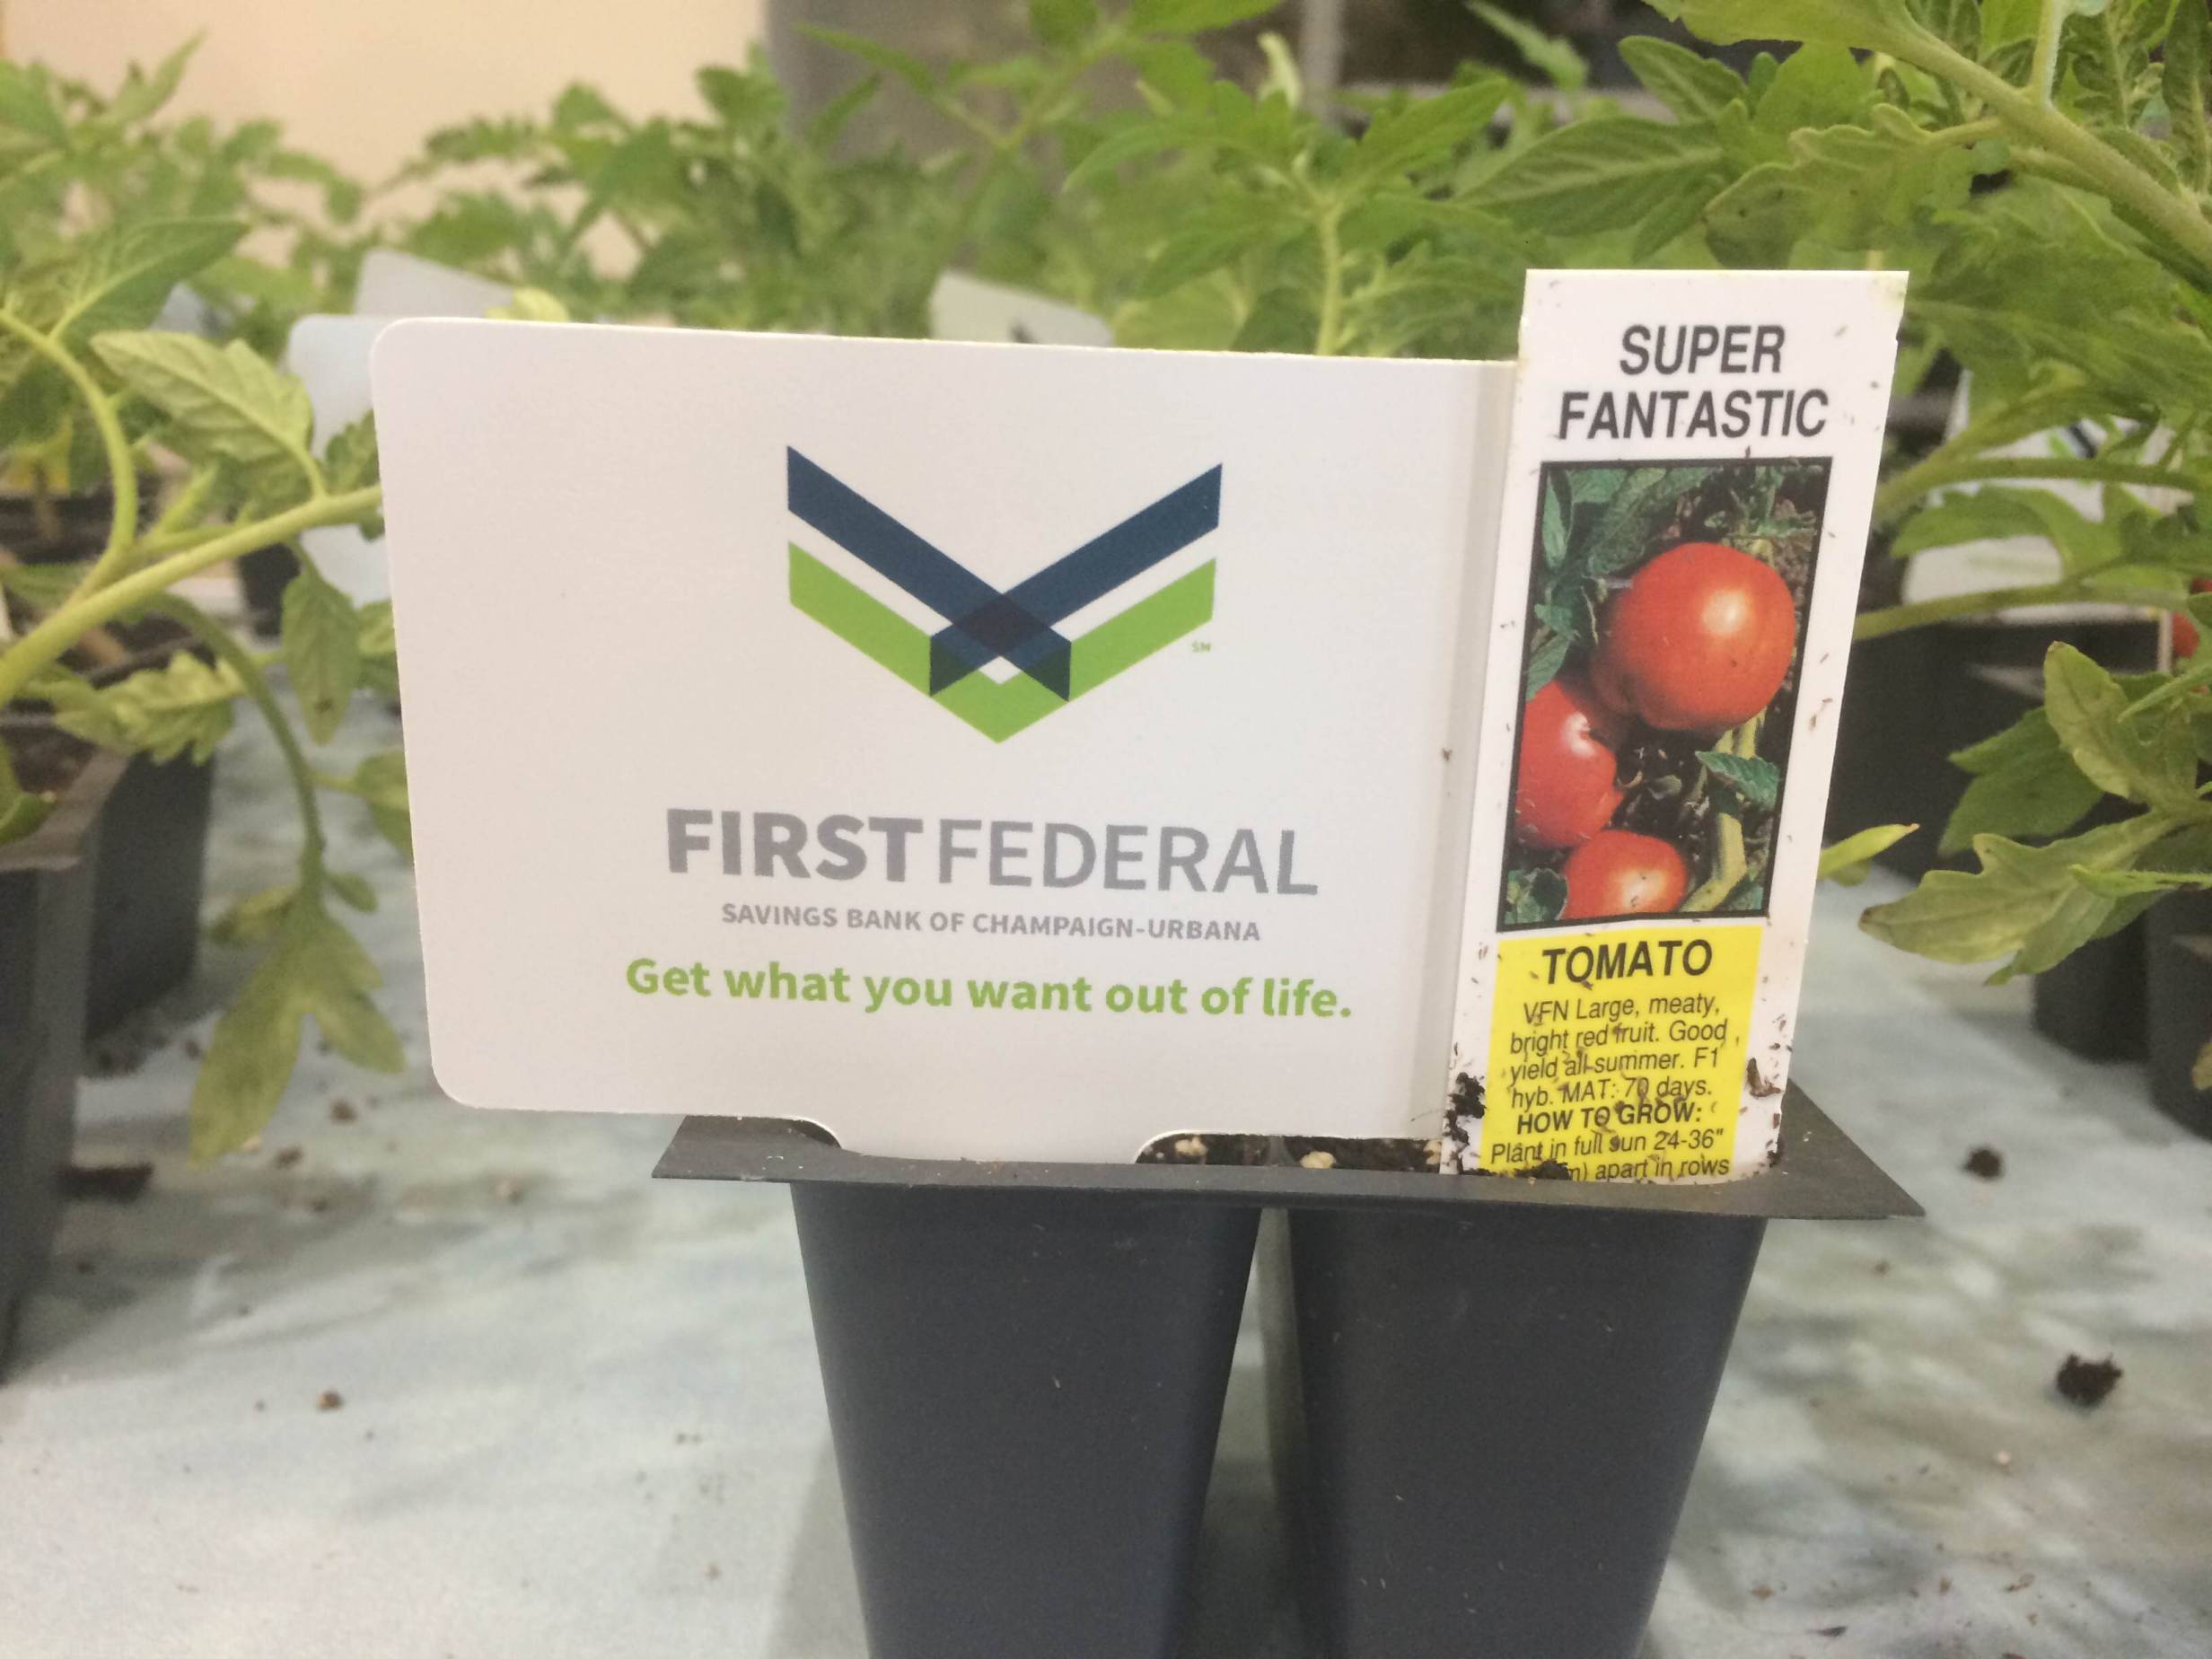 Get free tomato plants at First Federal Bank today